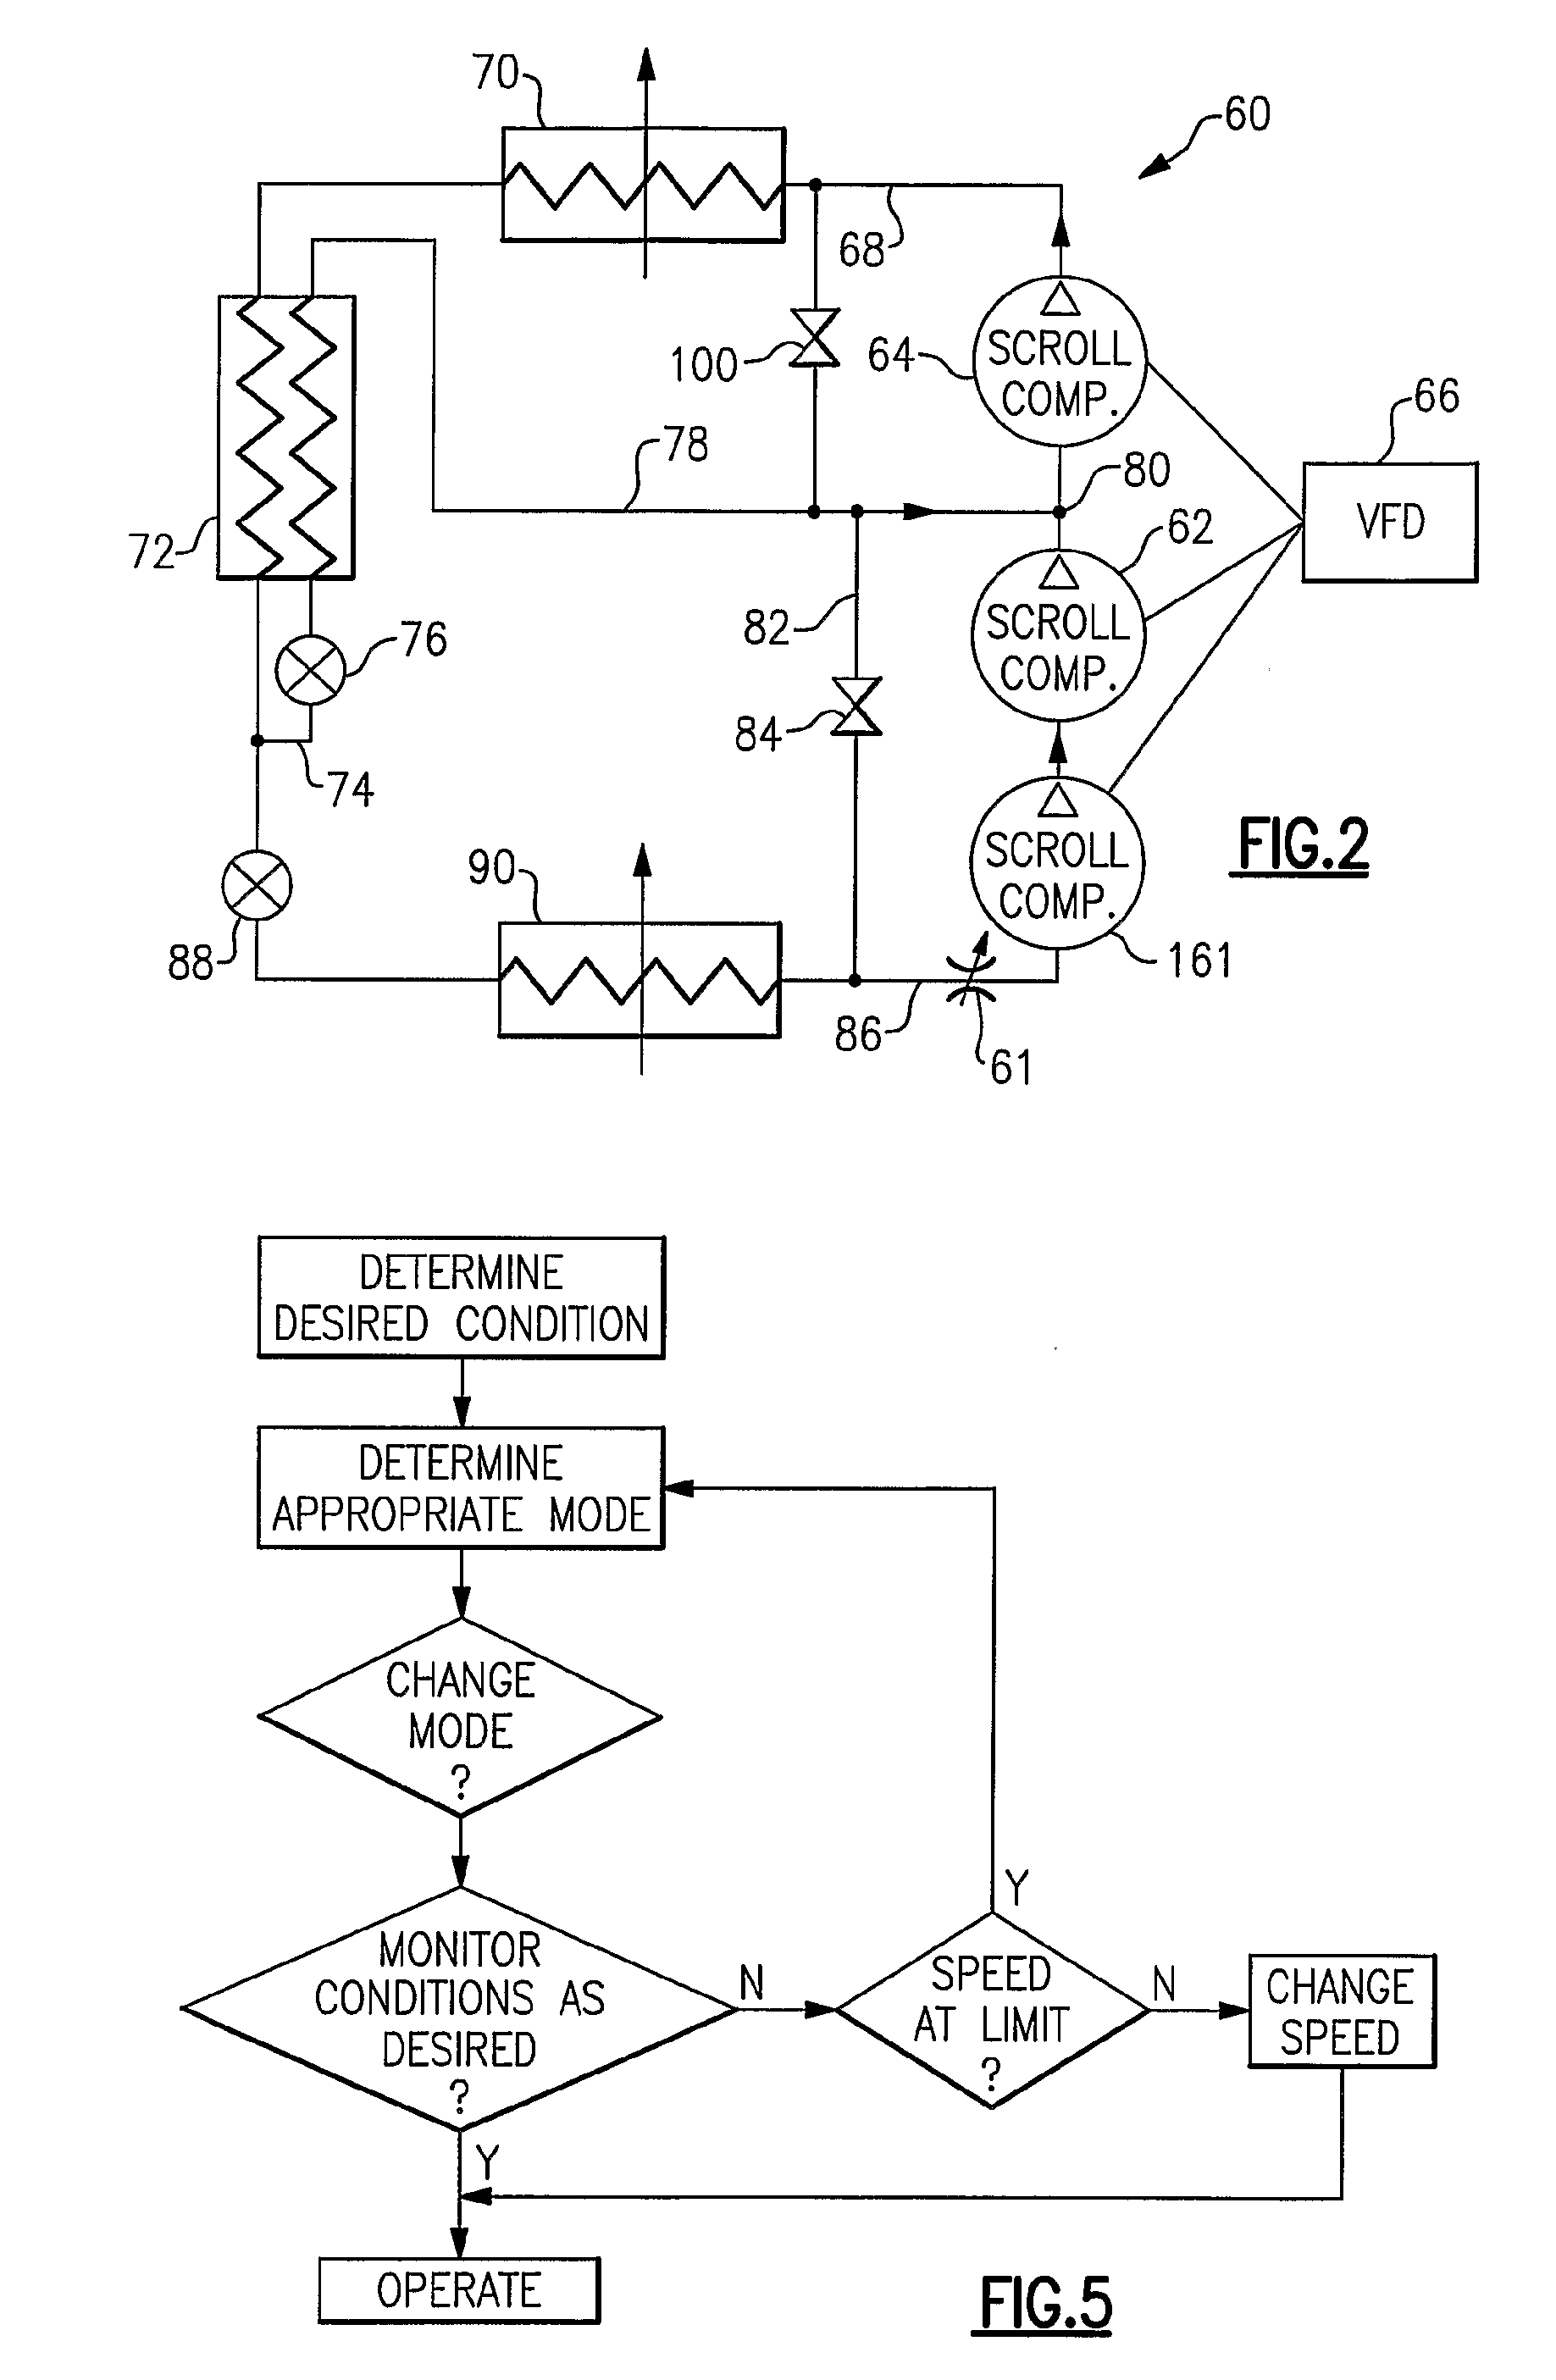 Refrigerant System With Variable Speed Scroll Compressor and Economizer Circuit